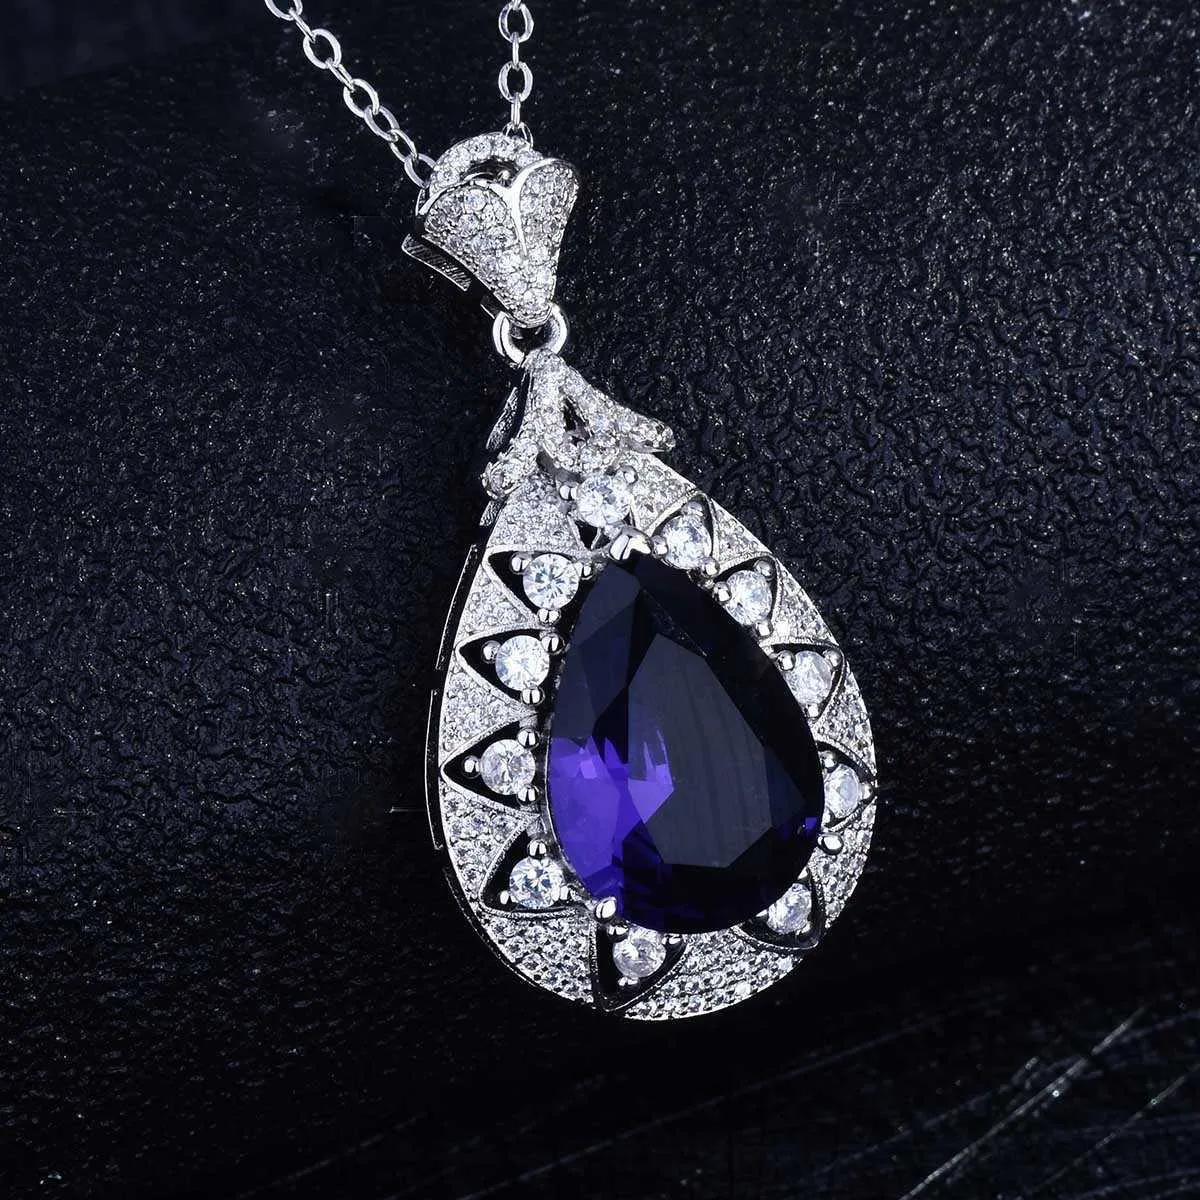 Ny 925 Silver Drop Pear Shaped Necklace Group Inlaid Full Diamonds Luxury Purple Pendant For Women Exquisite smycken hela7766458